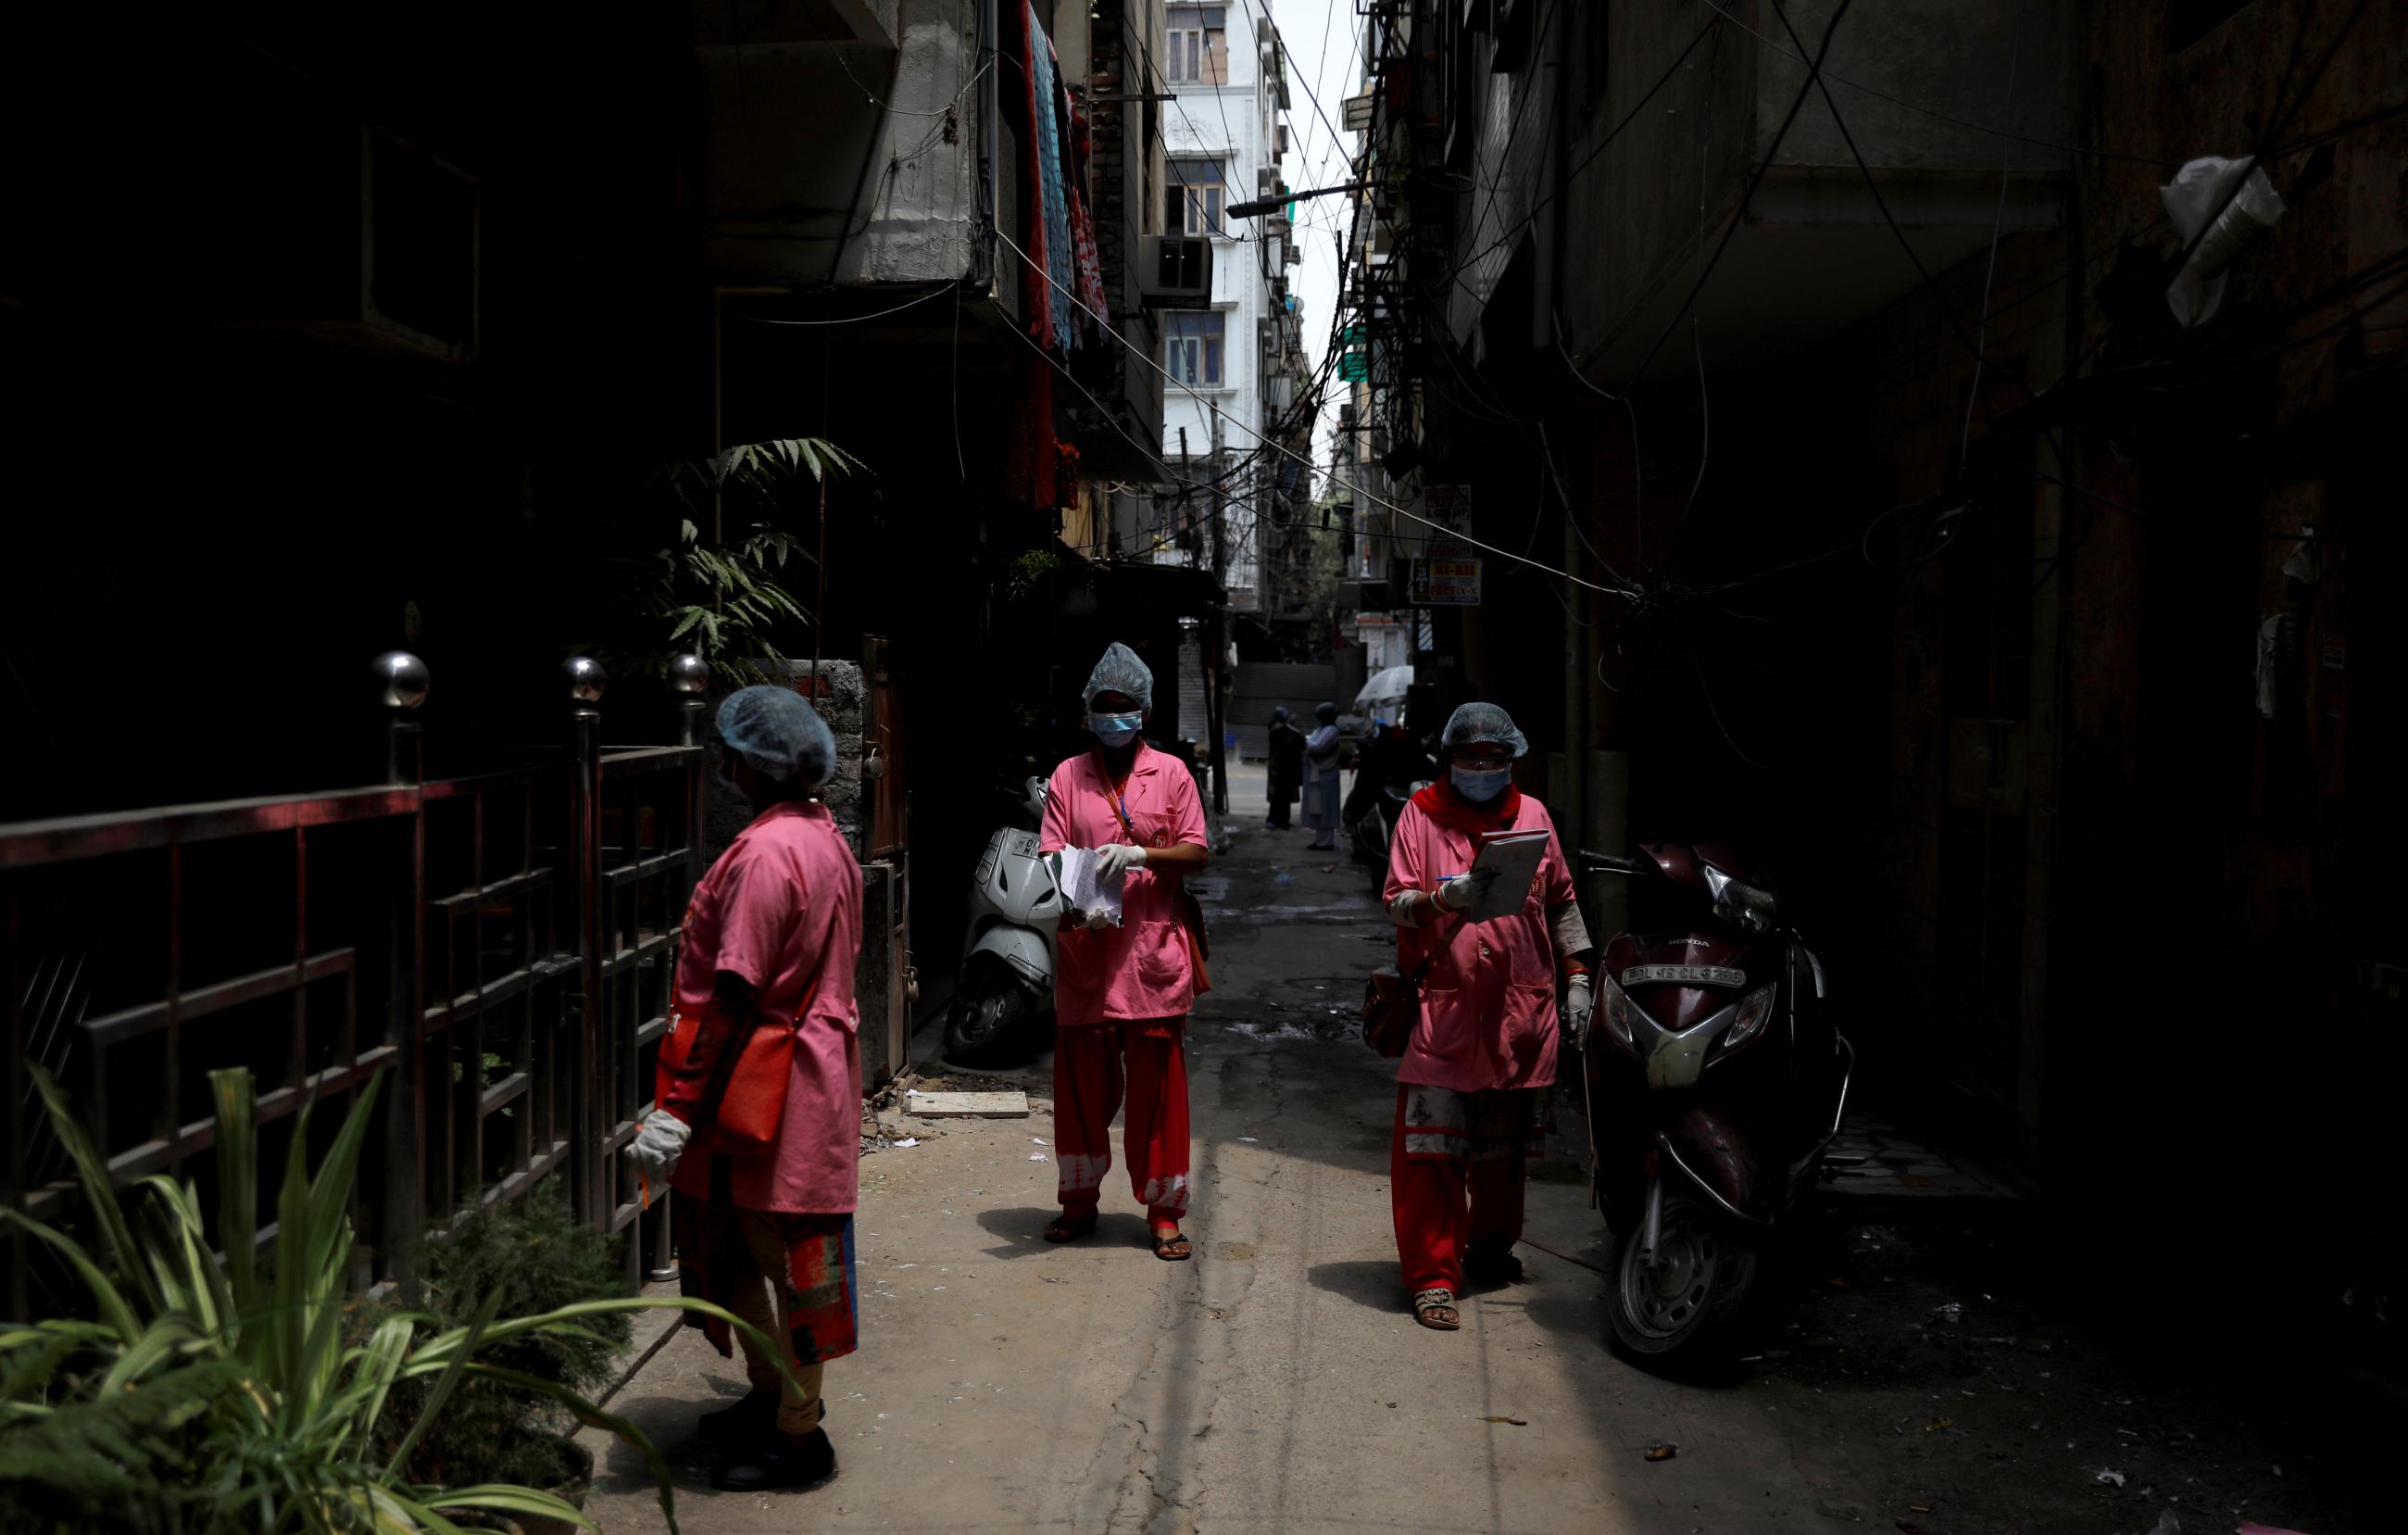 ASHA workers are seen in an alley as they conduct a door-to-door survey for COVID-19, amidst its spread in New Delhi, India, on June 26, 2020.